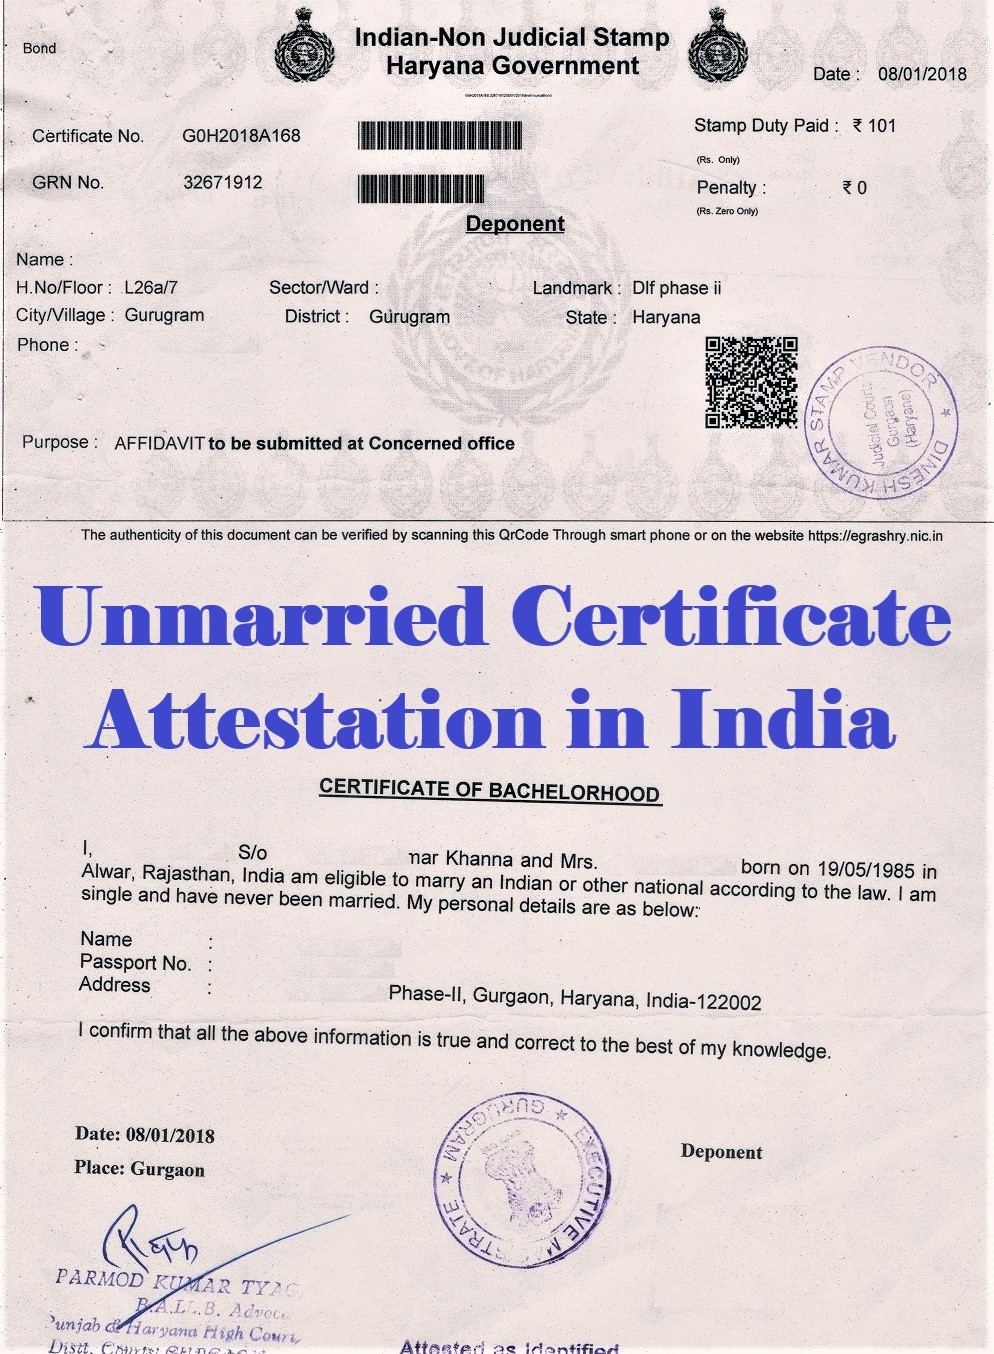 Unmarried Certificate Attestation from Bangladesh Embassy